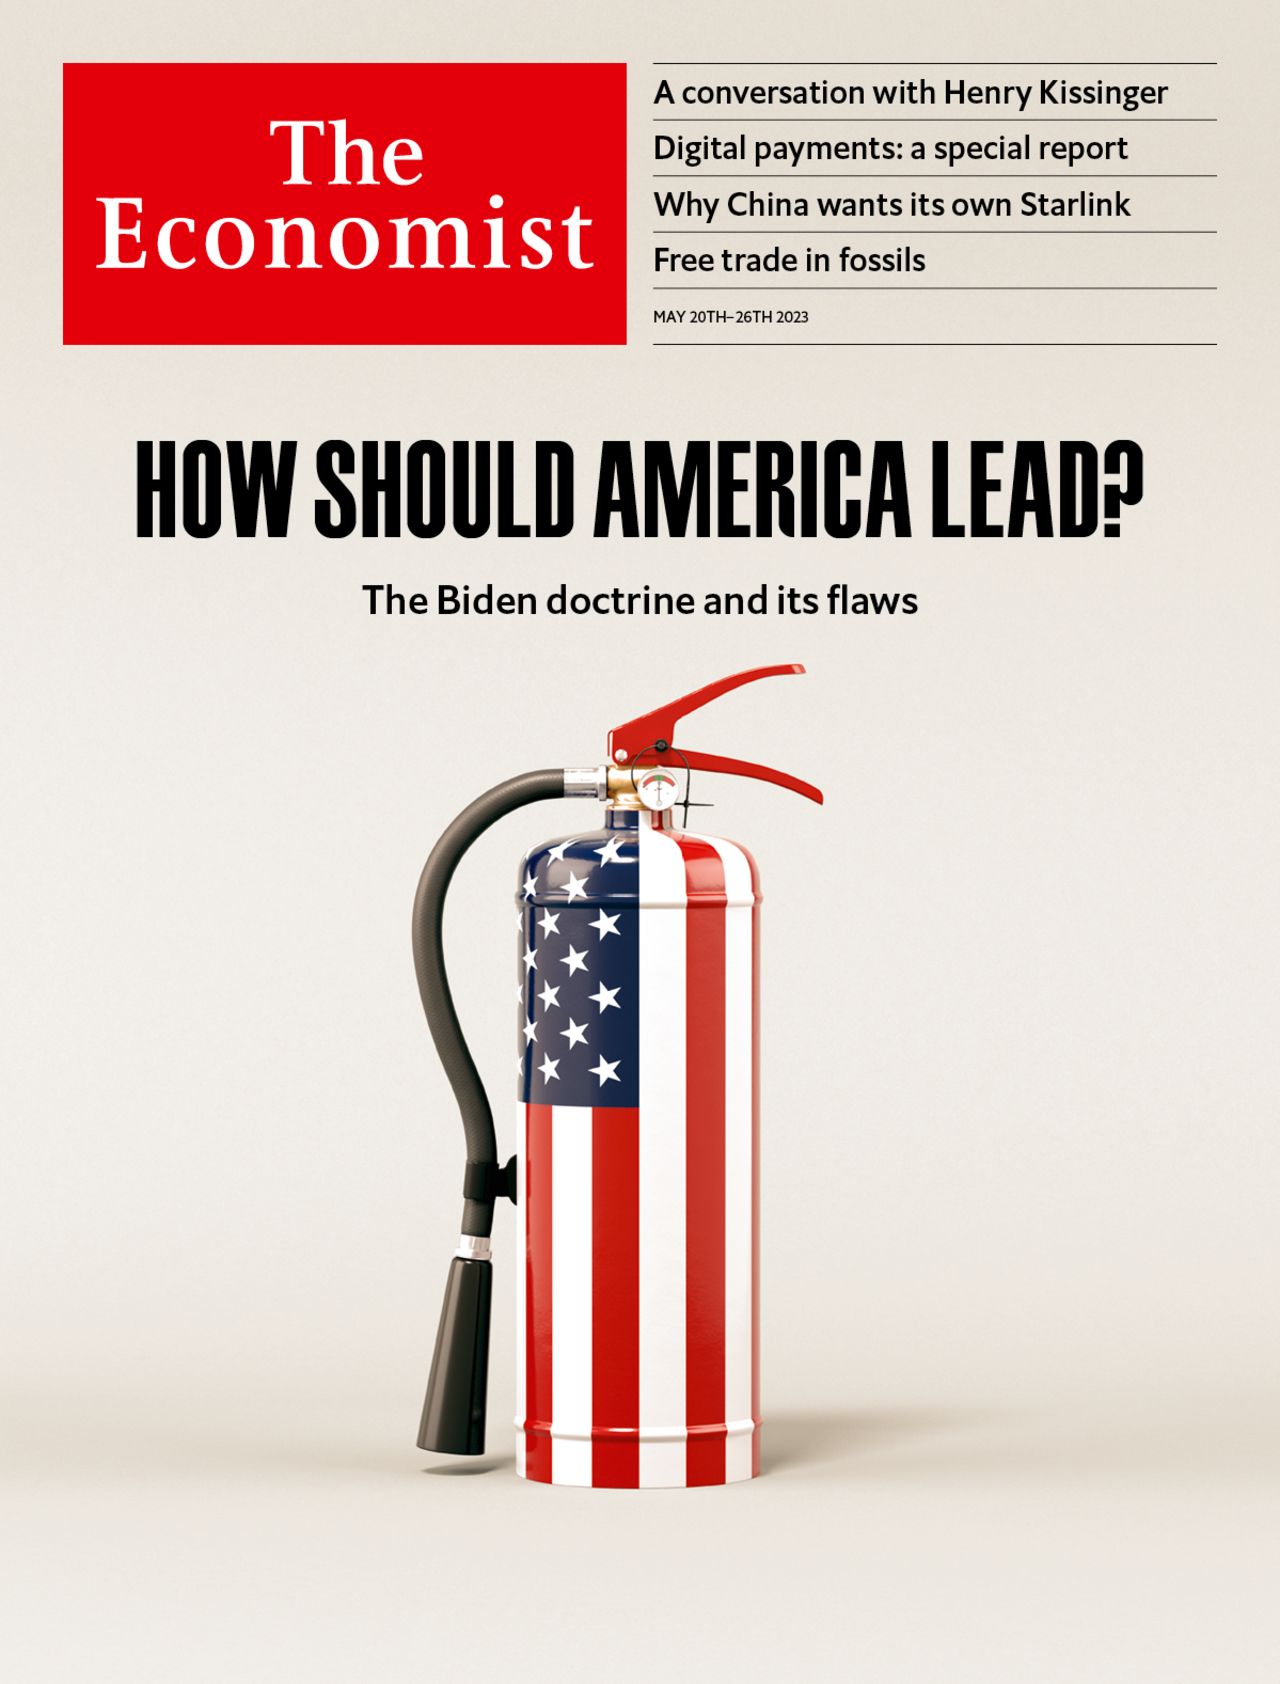 How should America lead? The Biden doctrine and its flaws